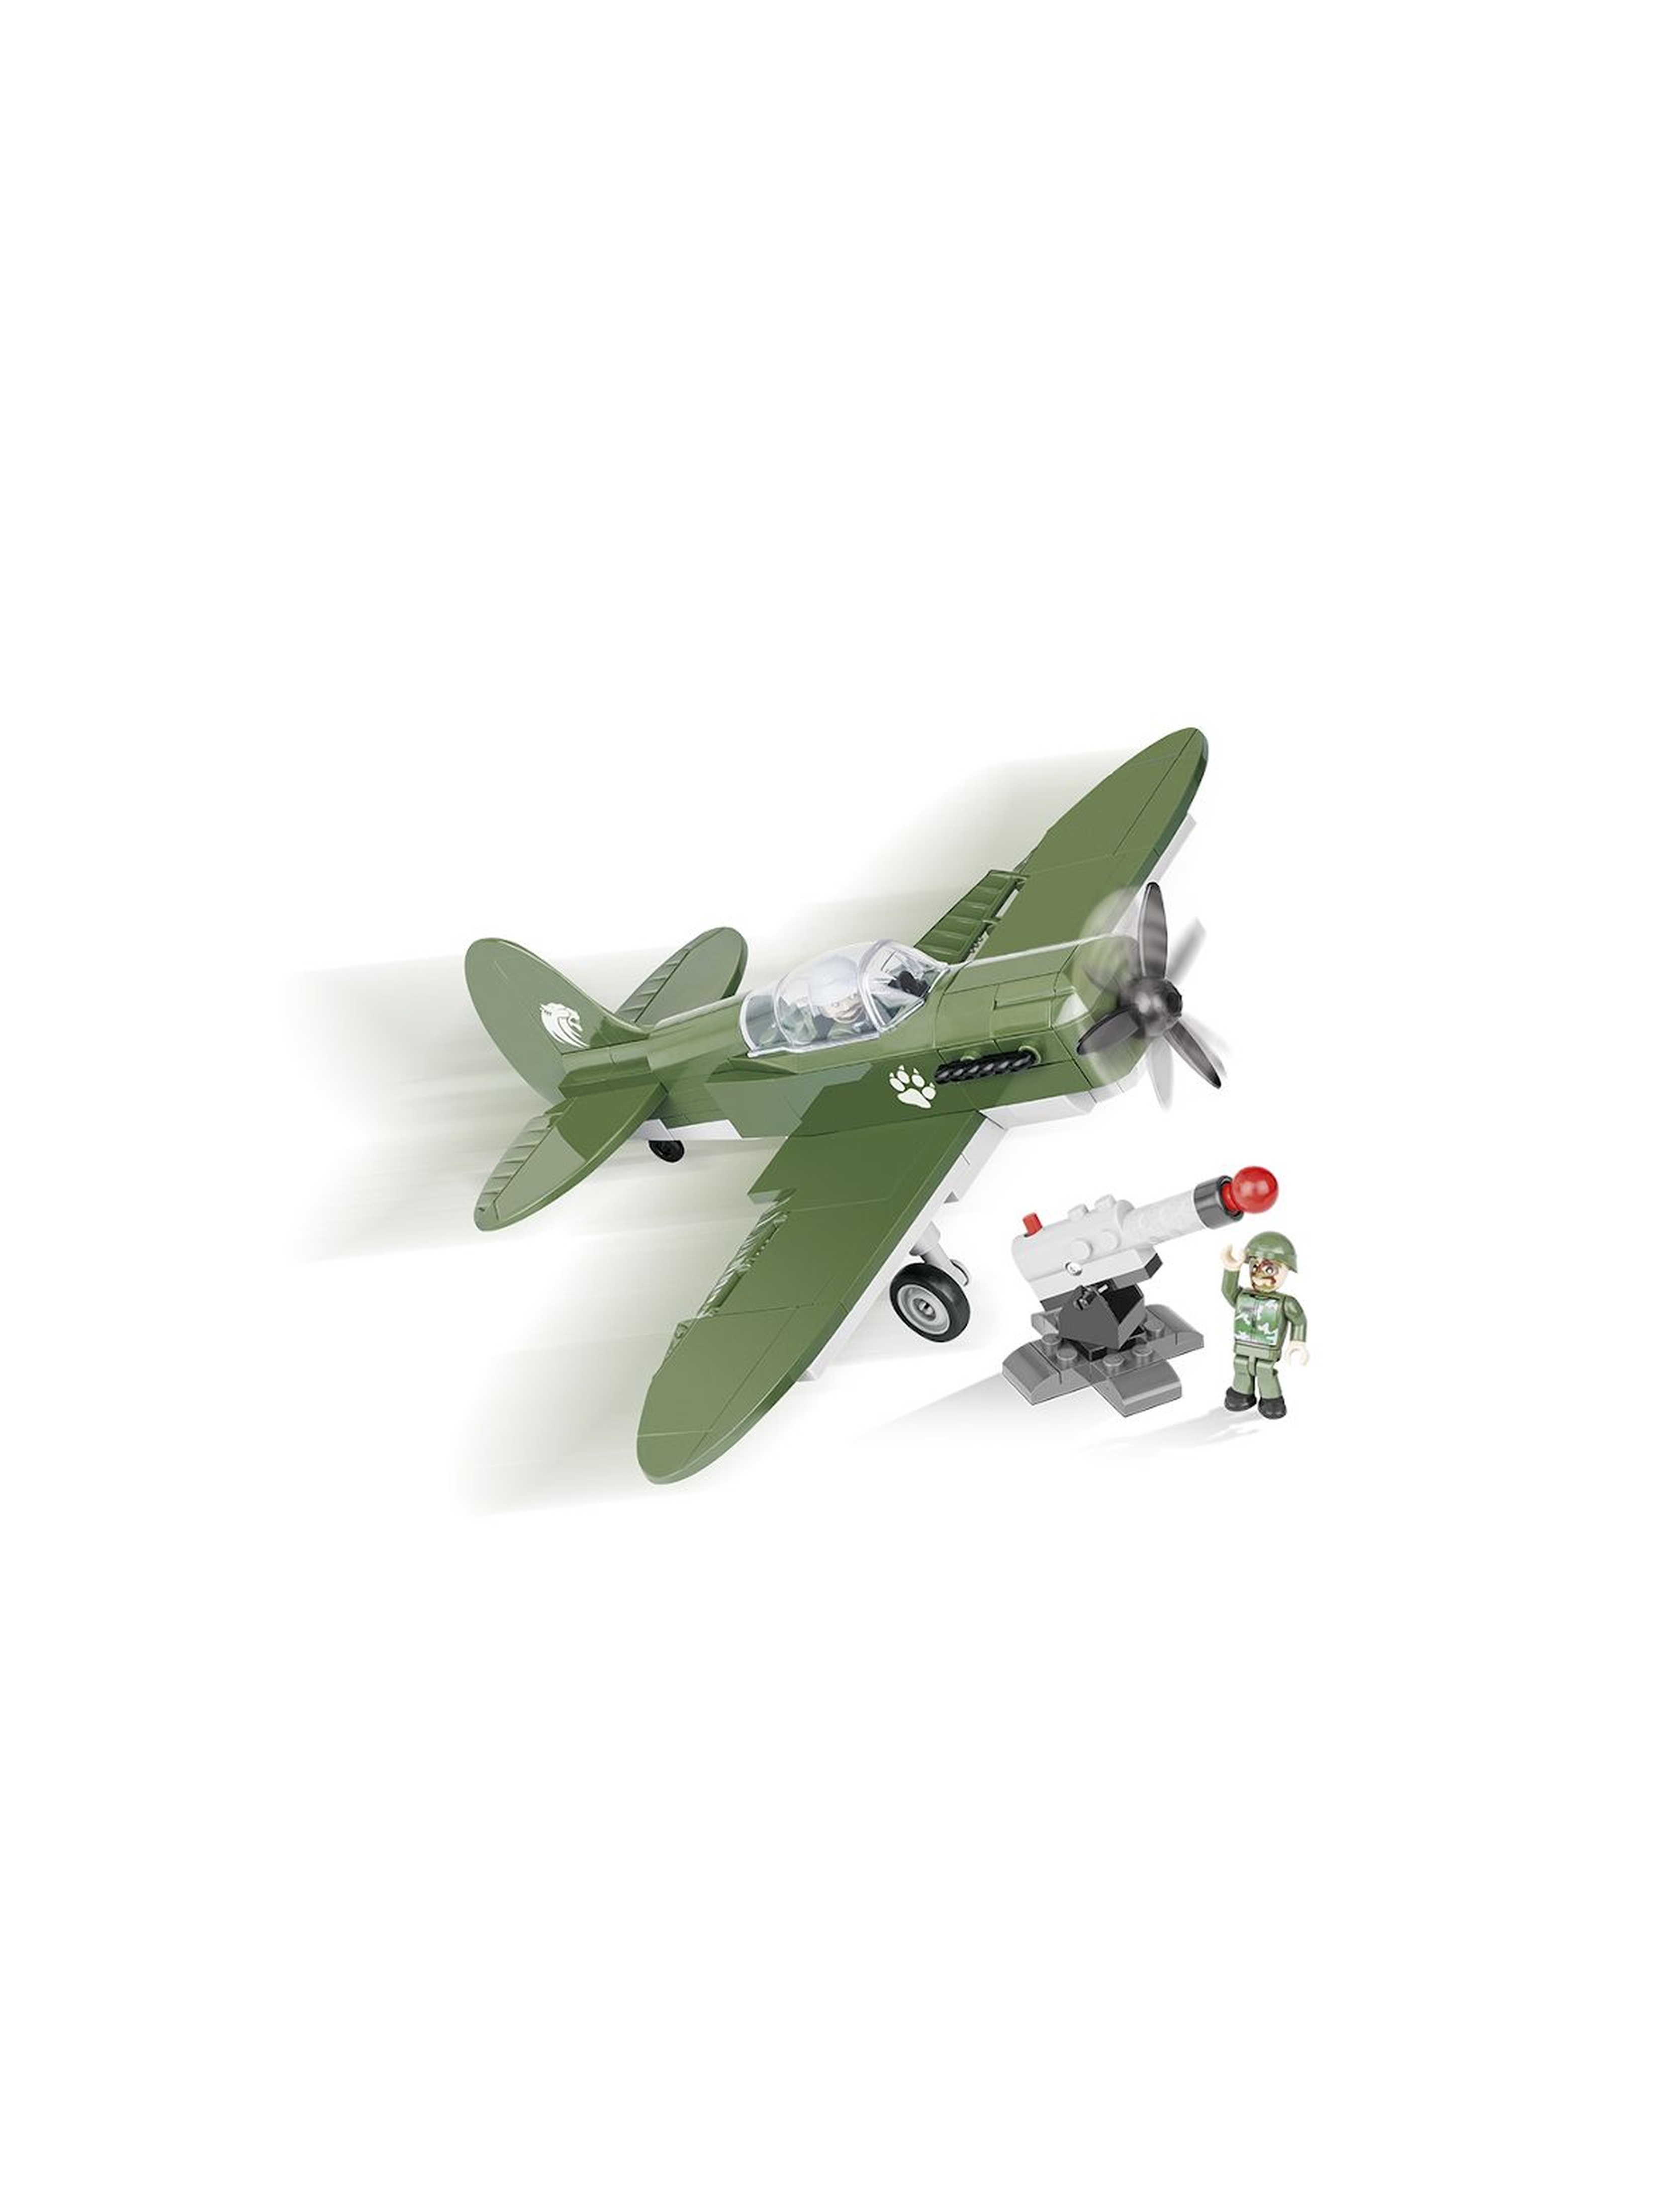 Klocki COBI Small Army Surface to Air missile mission 140el